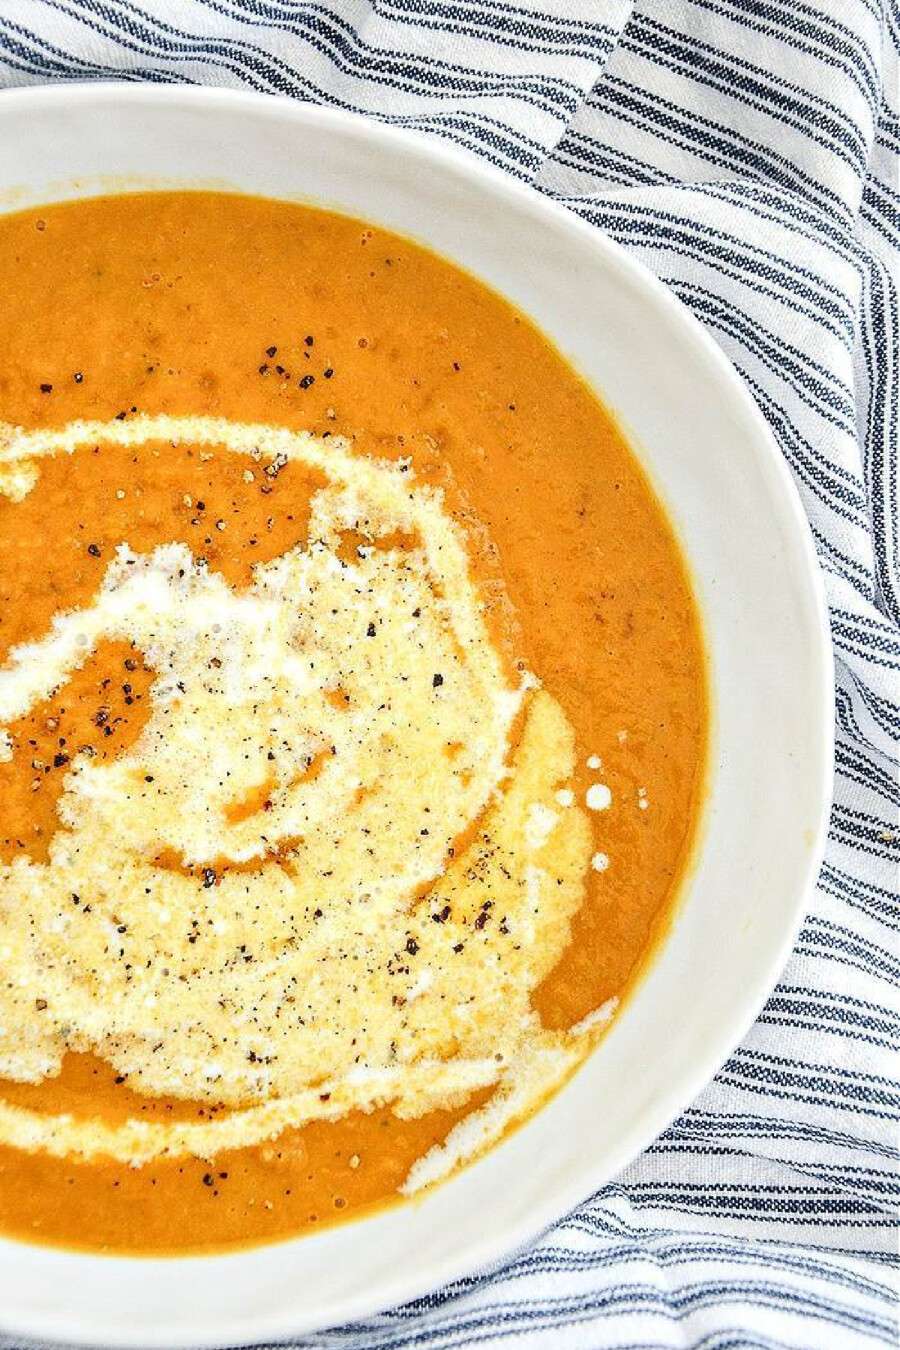 WEEKLY MENU PLAN AND RECIPES FOR OCT 25ND